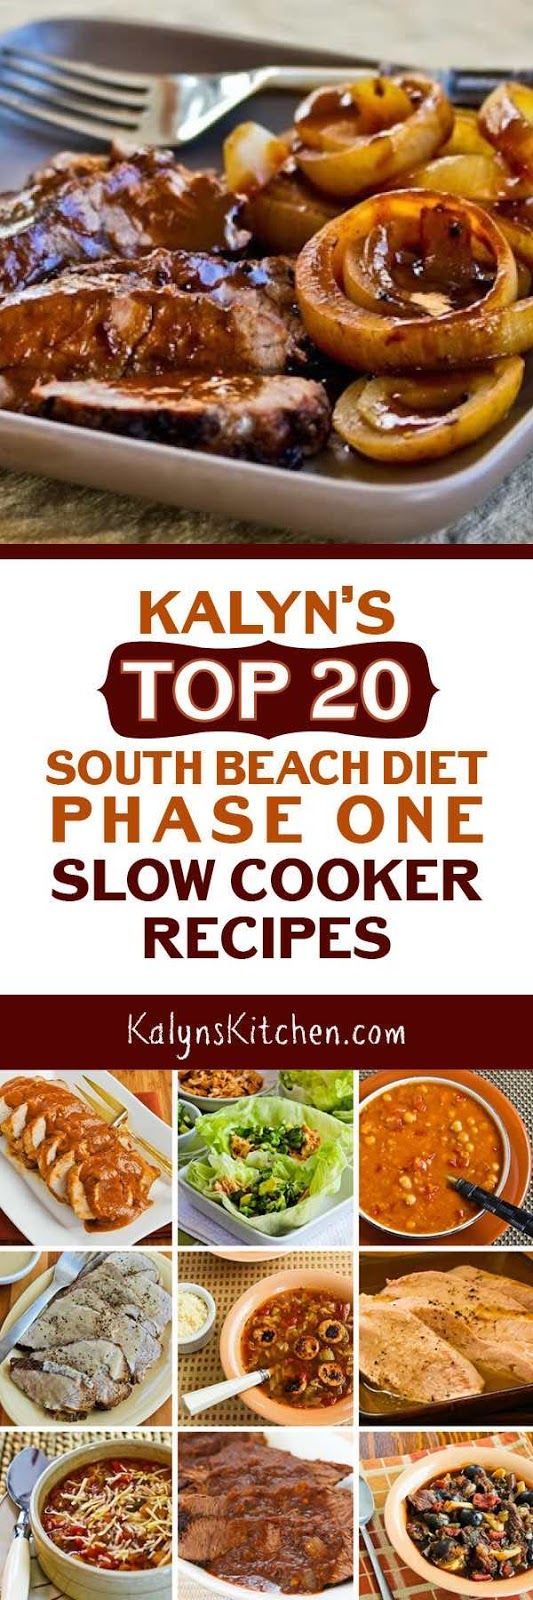 For everyone who’s starting the year with more carb-conscious eating, here are ,y Top 20 South Beach Diet Phase One Slow Cooker